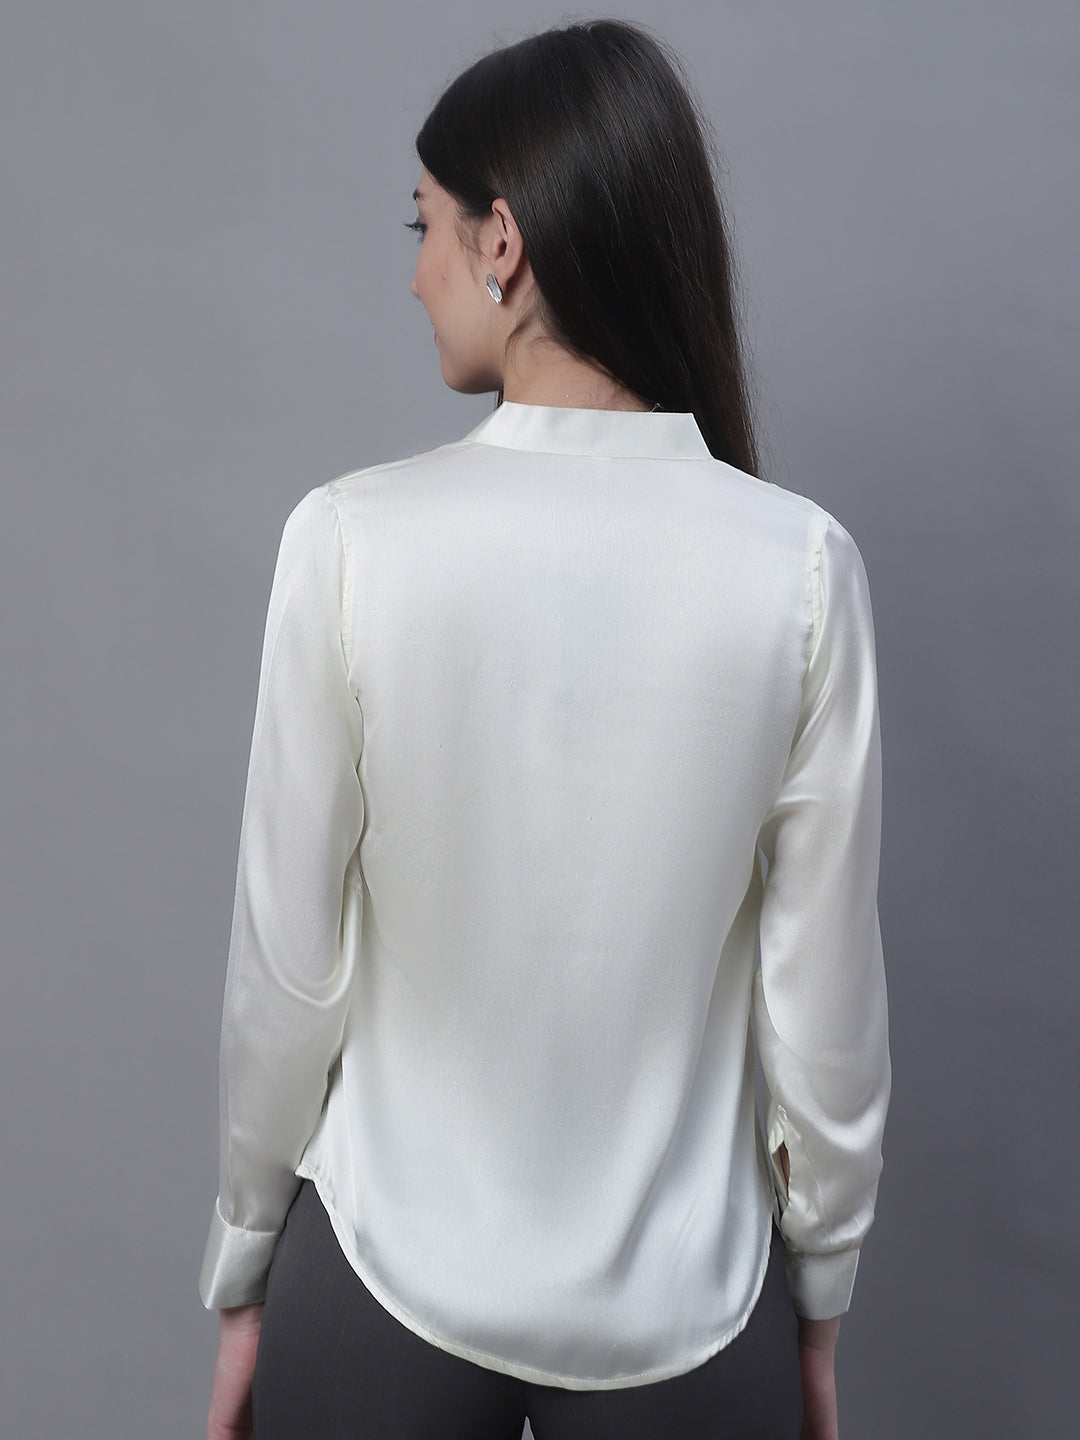 Women White Solid Shirt Style Top